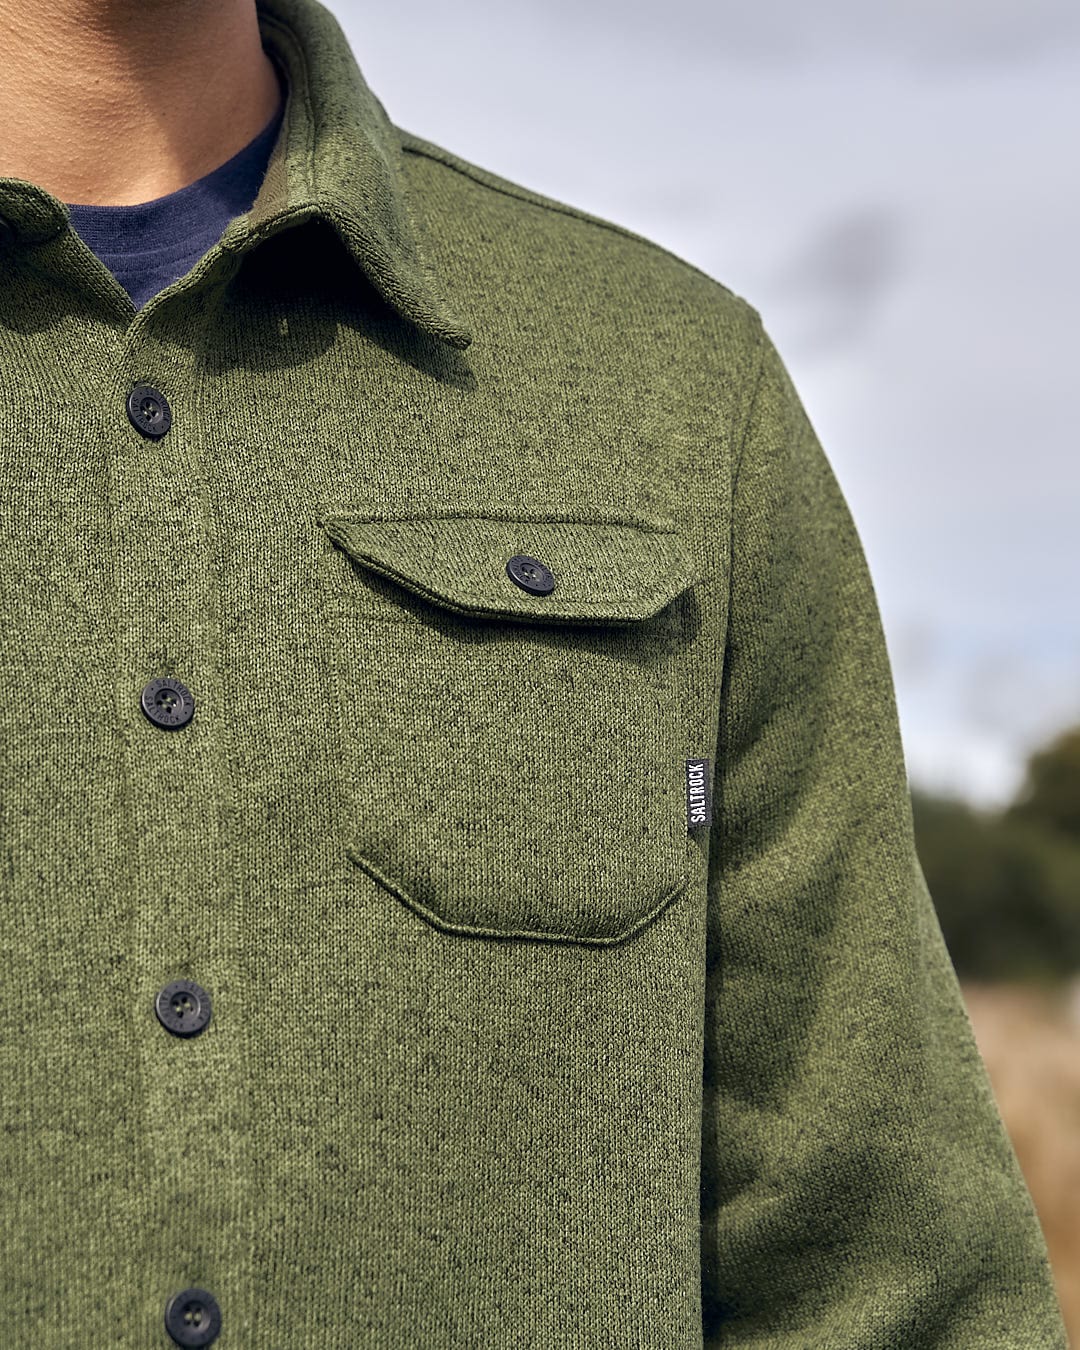 A man in a stylish green Saltrock Levick - Mens Long Sleeve Shirt is standing in a field, representing the brand's fashionable image.